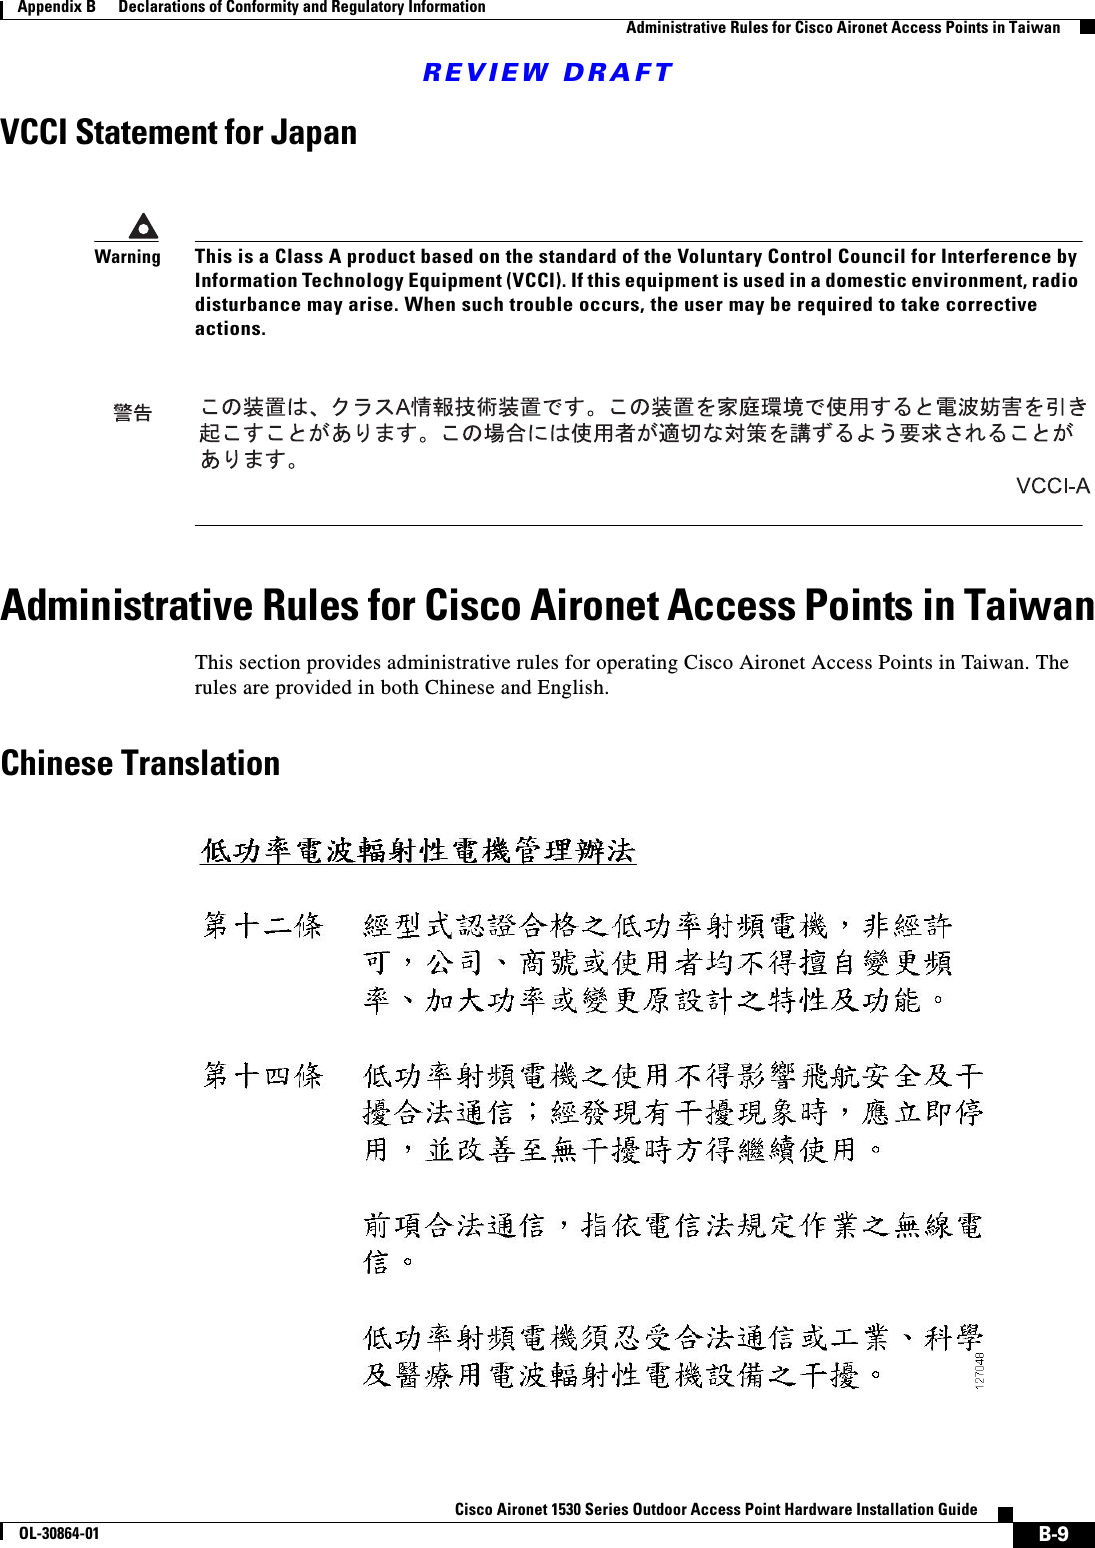 REVIEW DRAFTB-9Cisco Aironet 1530 Series Outdoor Access Point Hardware Installation GuideOL-30864-01Appendix B      Declarations of Conformity and Regulatory InformationAdministrative Rules for Cisco Aironet Access Points in TaiwanVCCI Statement for JapanAdministrative Rules for Cisco Aironet Access Points in TaiwanThis section provides administrative rules for operating Cisco Aironet Access Points in Taiwan. The rules are provided in both Chinese and English.Chinese TranslationWarningThis is a Class A product based on the standard of the Voluntary Control Council for Interference by Information Technology Equipment (VCCI). If this equipment is used in a domestic environment, radio disturbance may arise. When such trouble occurs, the user may be required to take corrective actions.